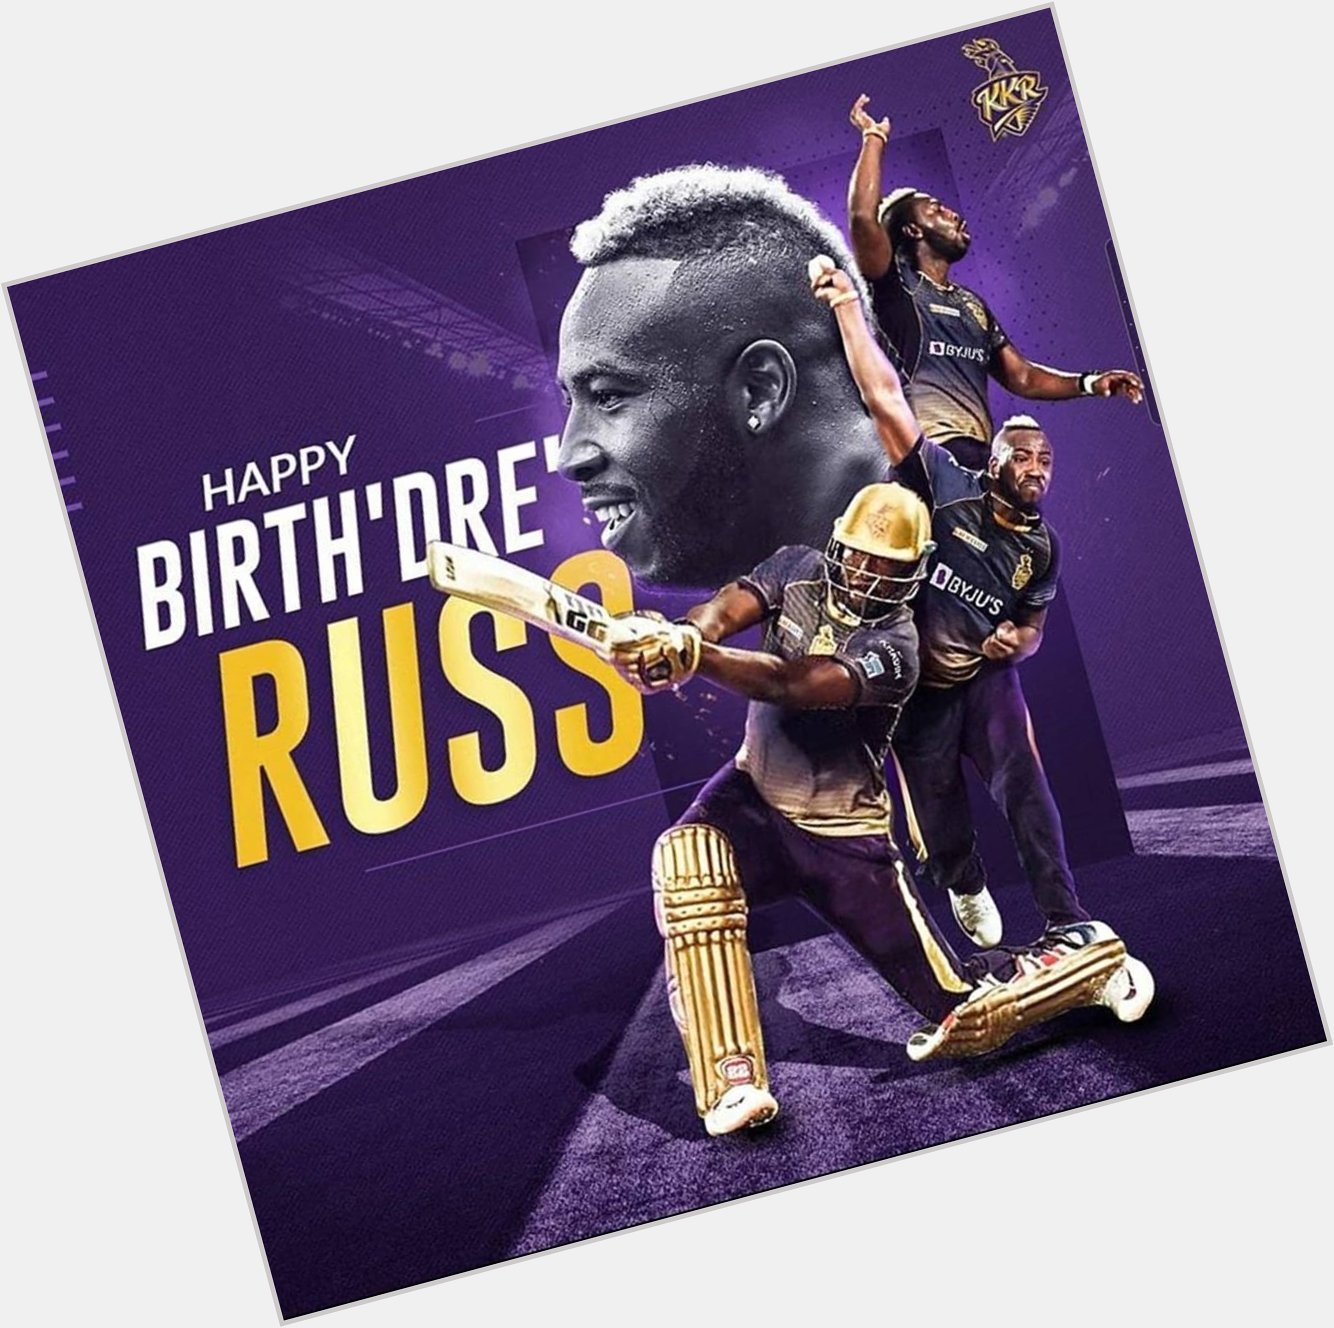 Happy Birthday to Andre Russell...
Have a sweet birthday ... Men 